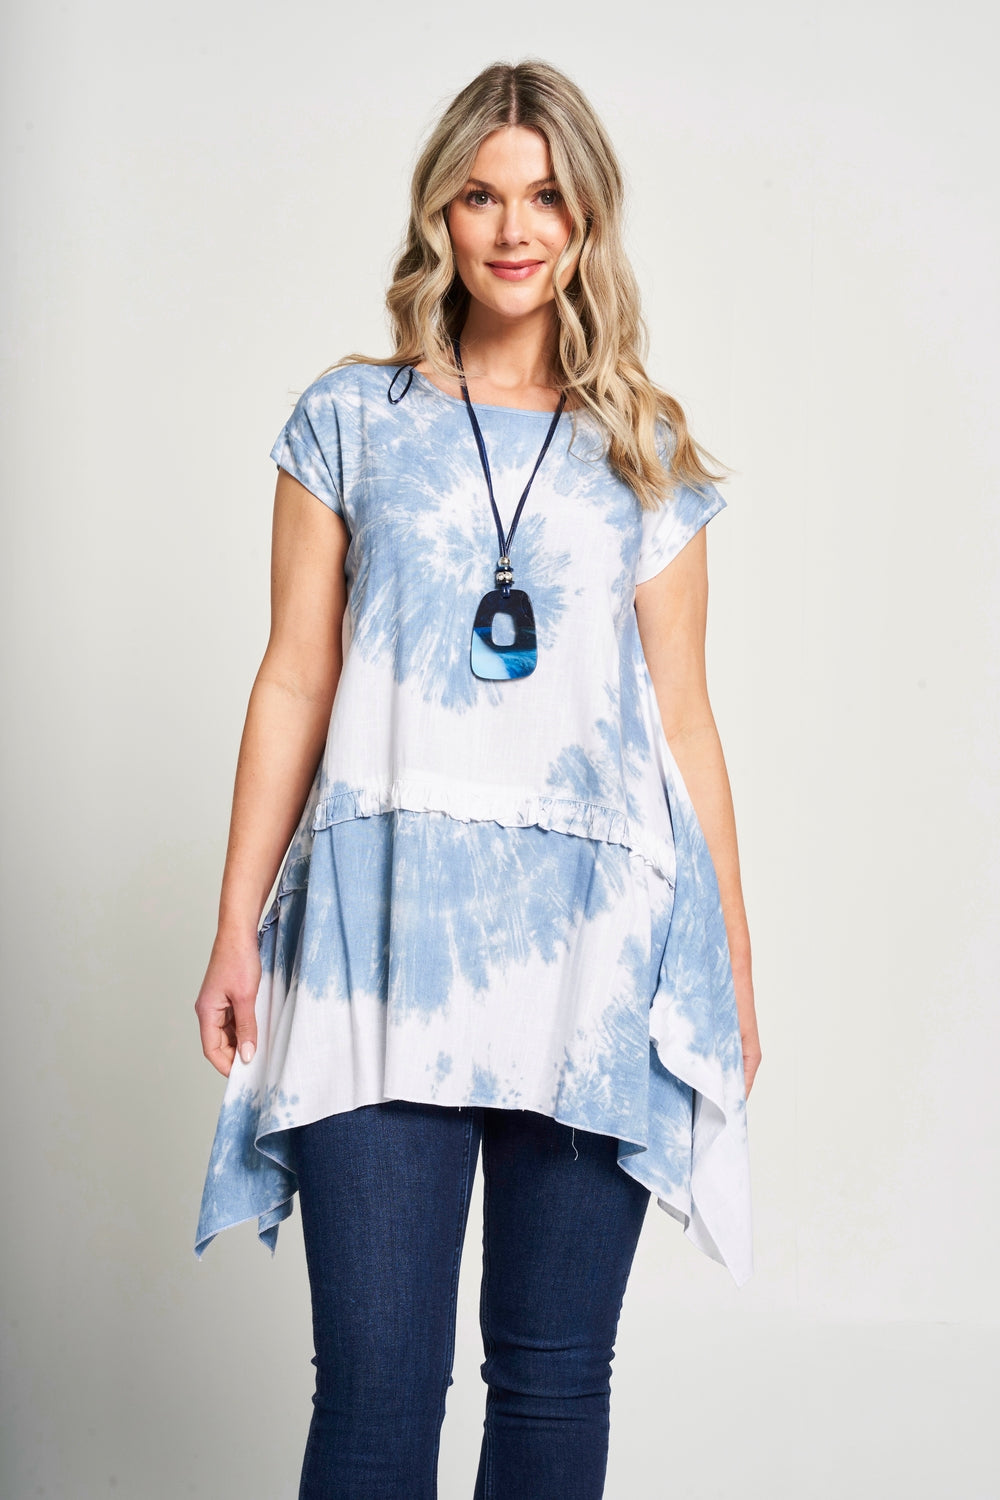 Saloos Tie Dye Frill Sleeve Tunic with Necklace